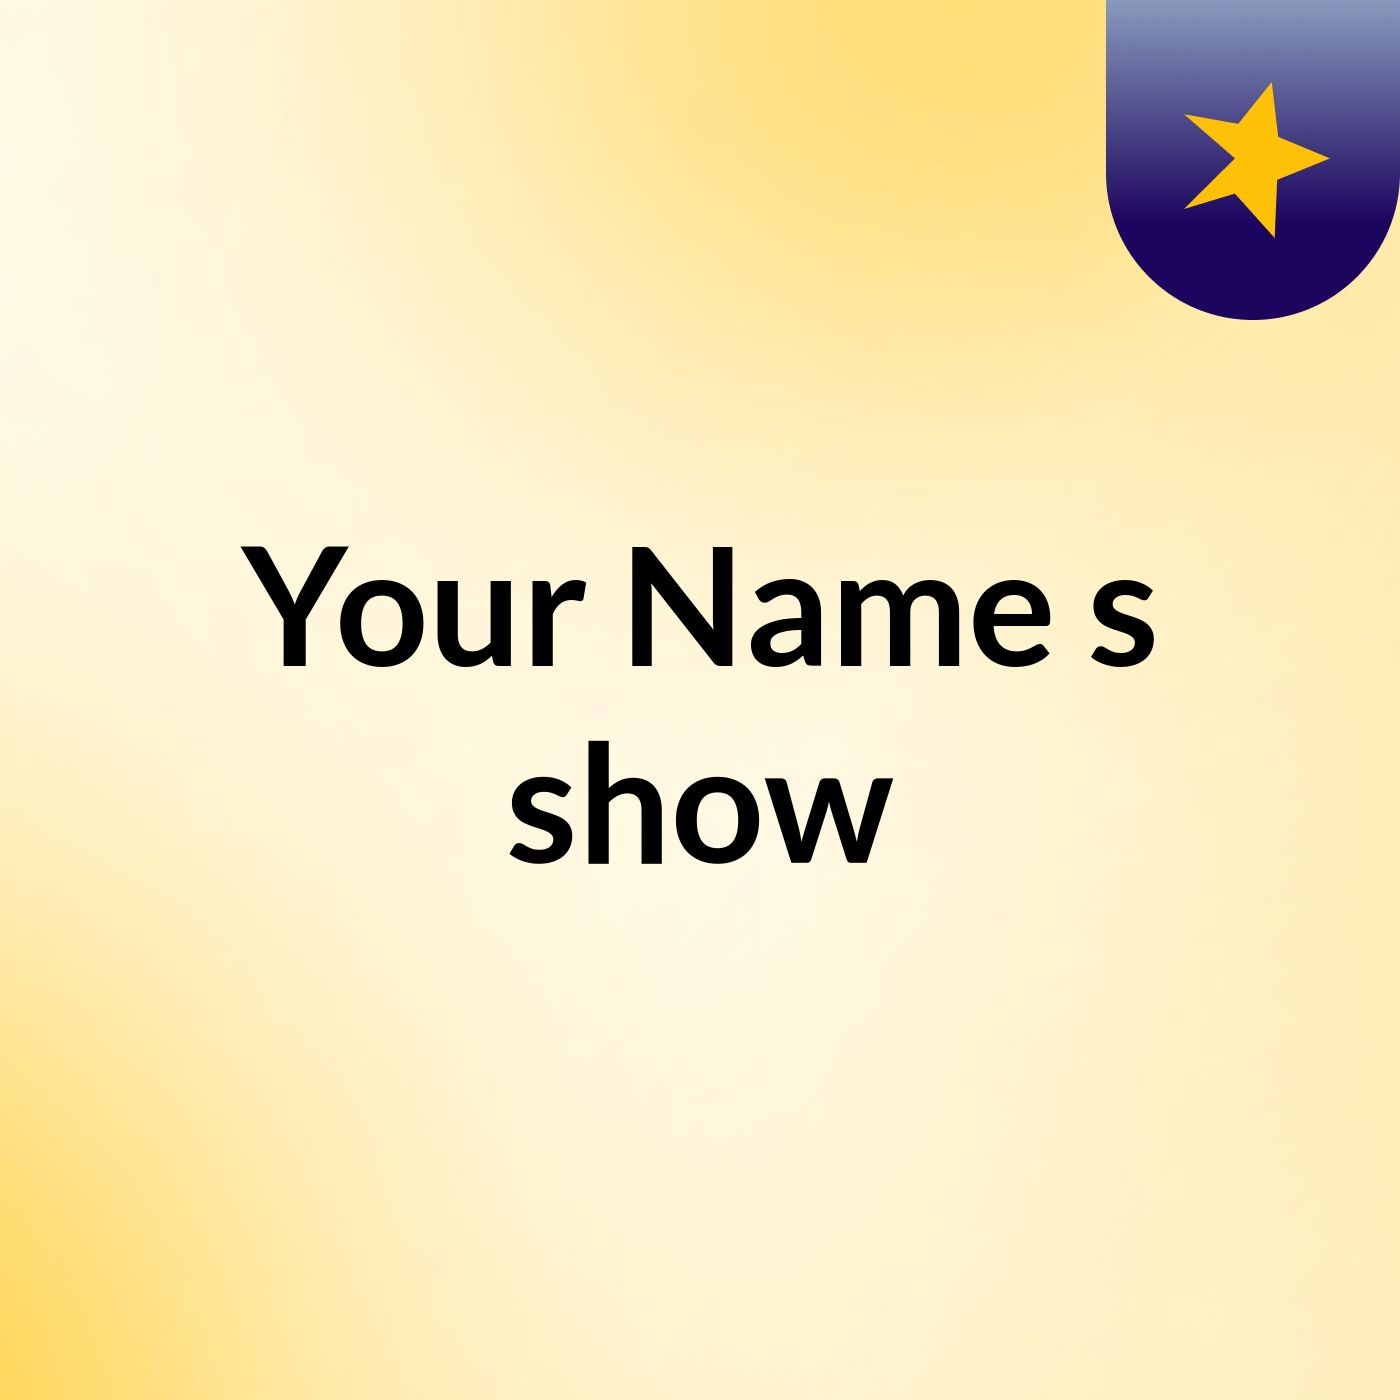 Your Name's show